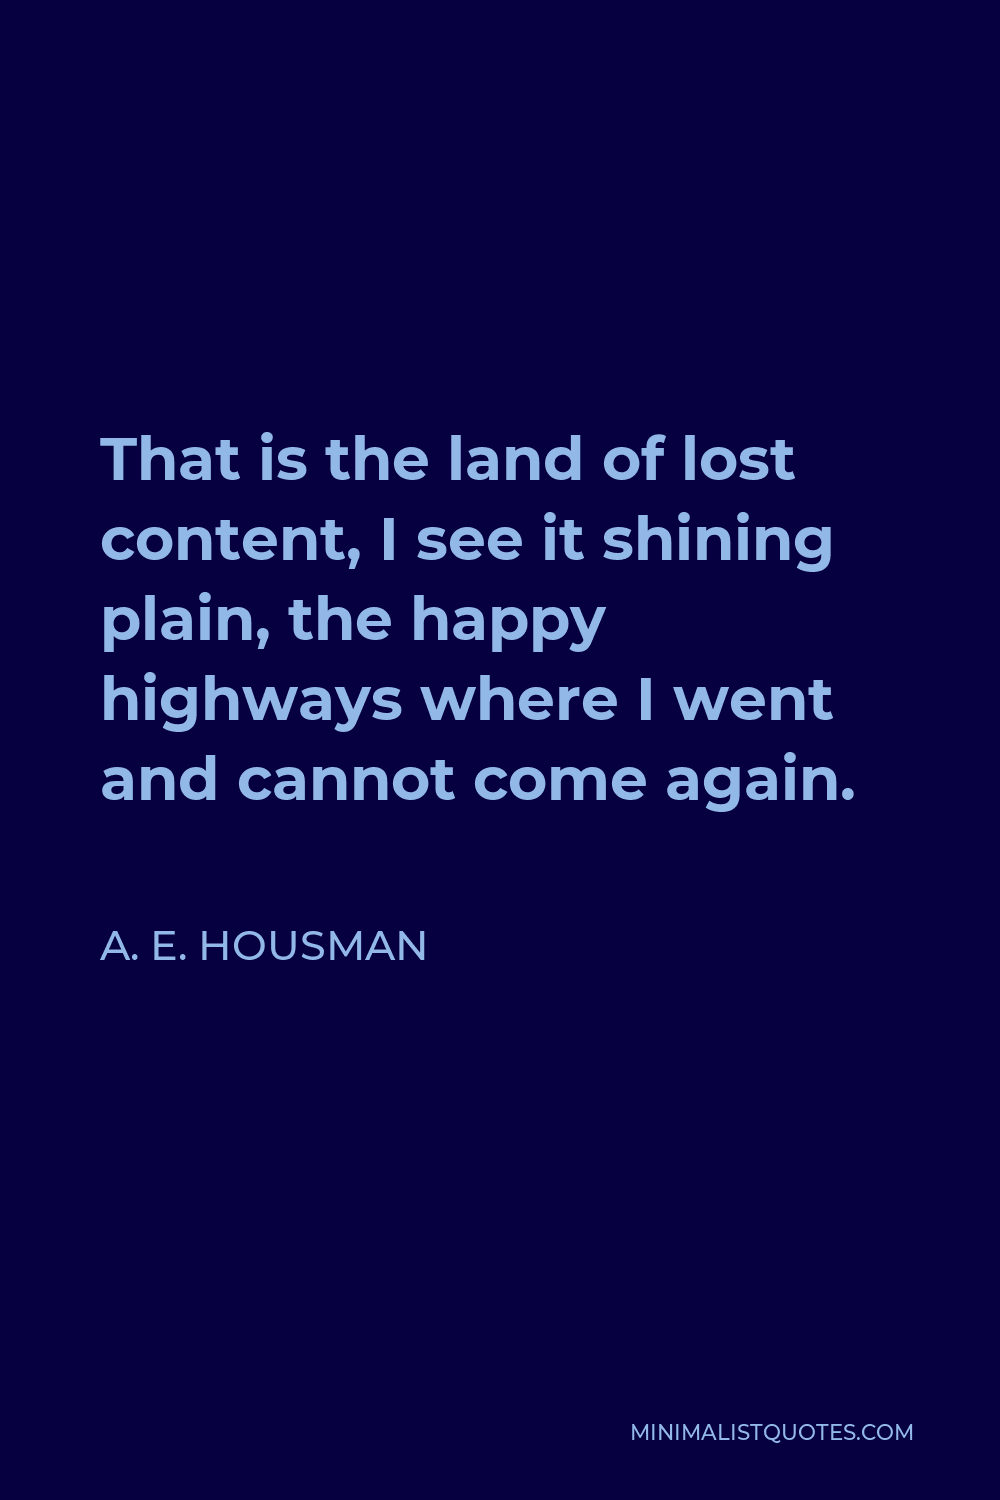 A. E. Housman Quote - That is the land of lost content, I see it shining plain, the happy highways where I went and cannot come again.